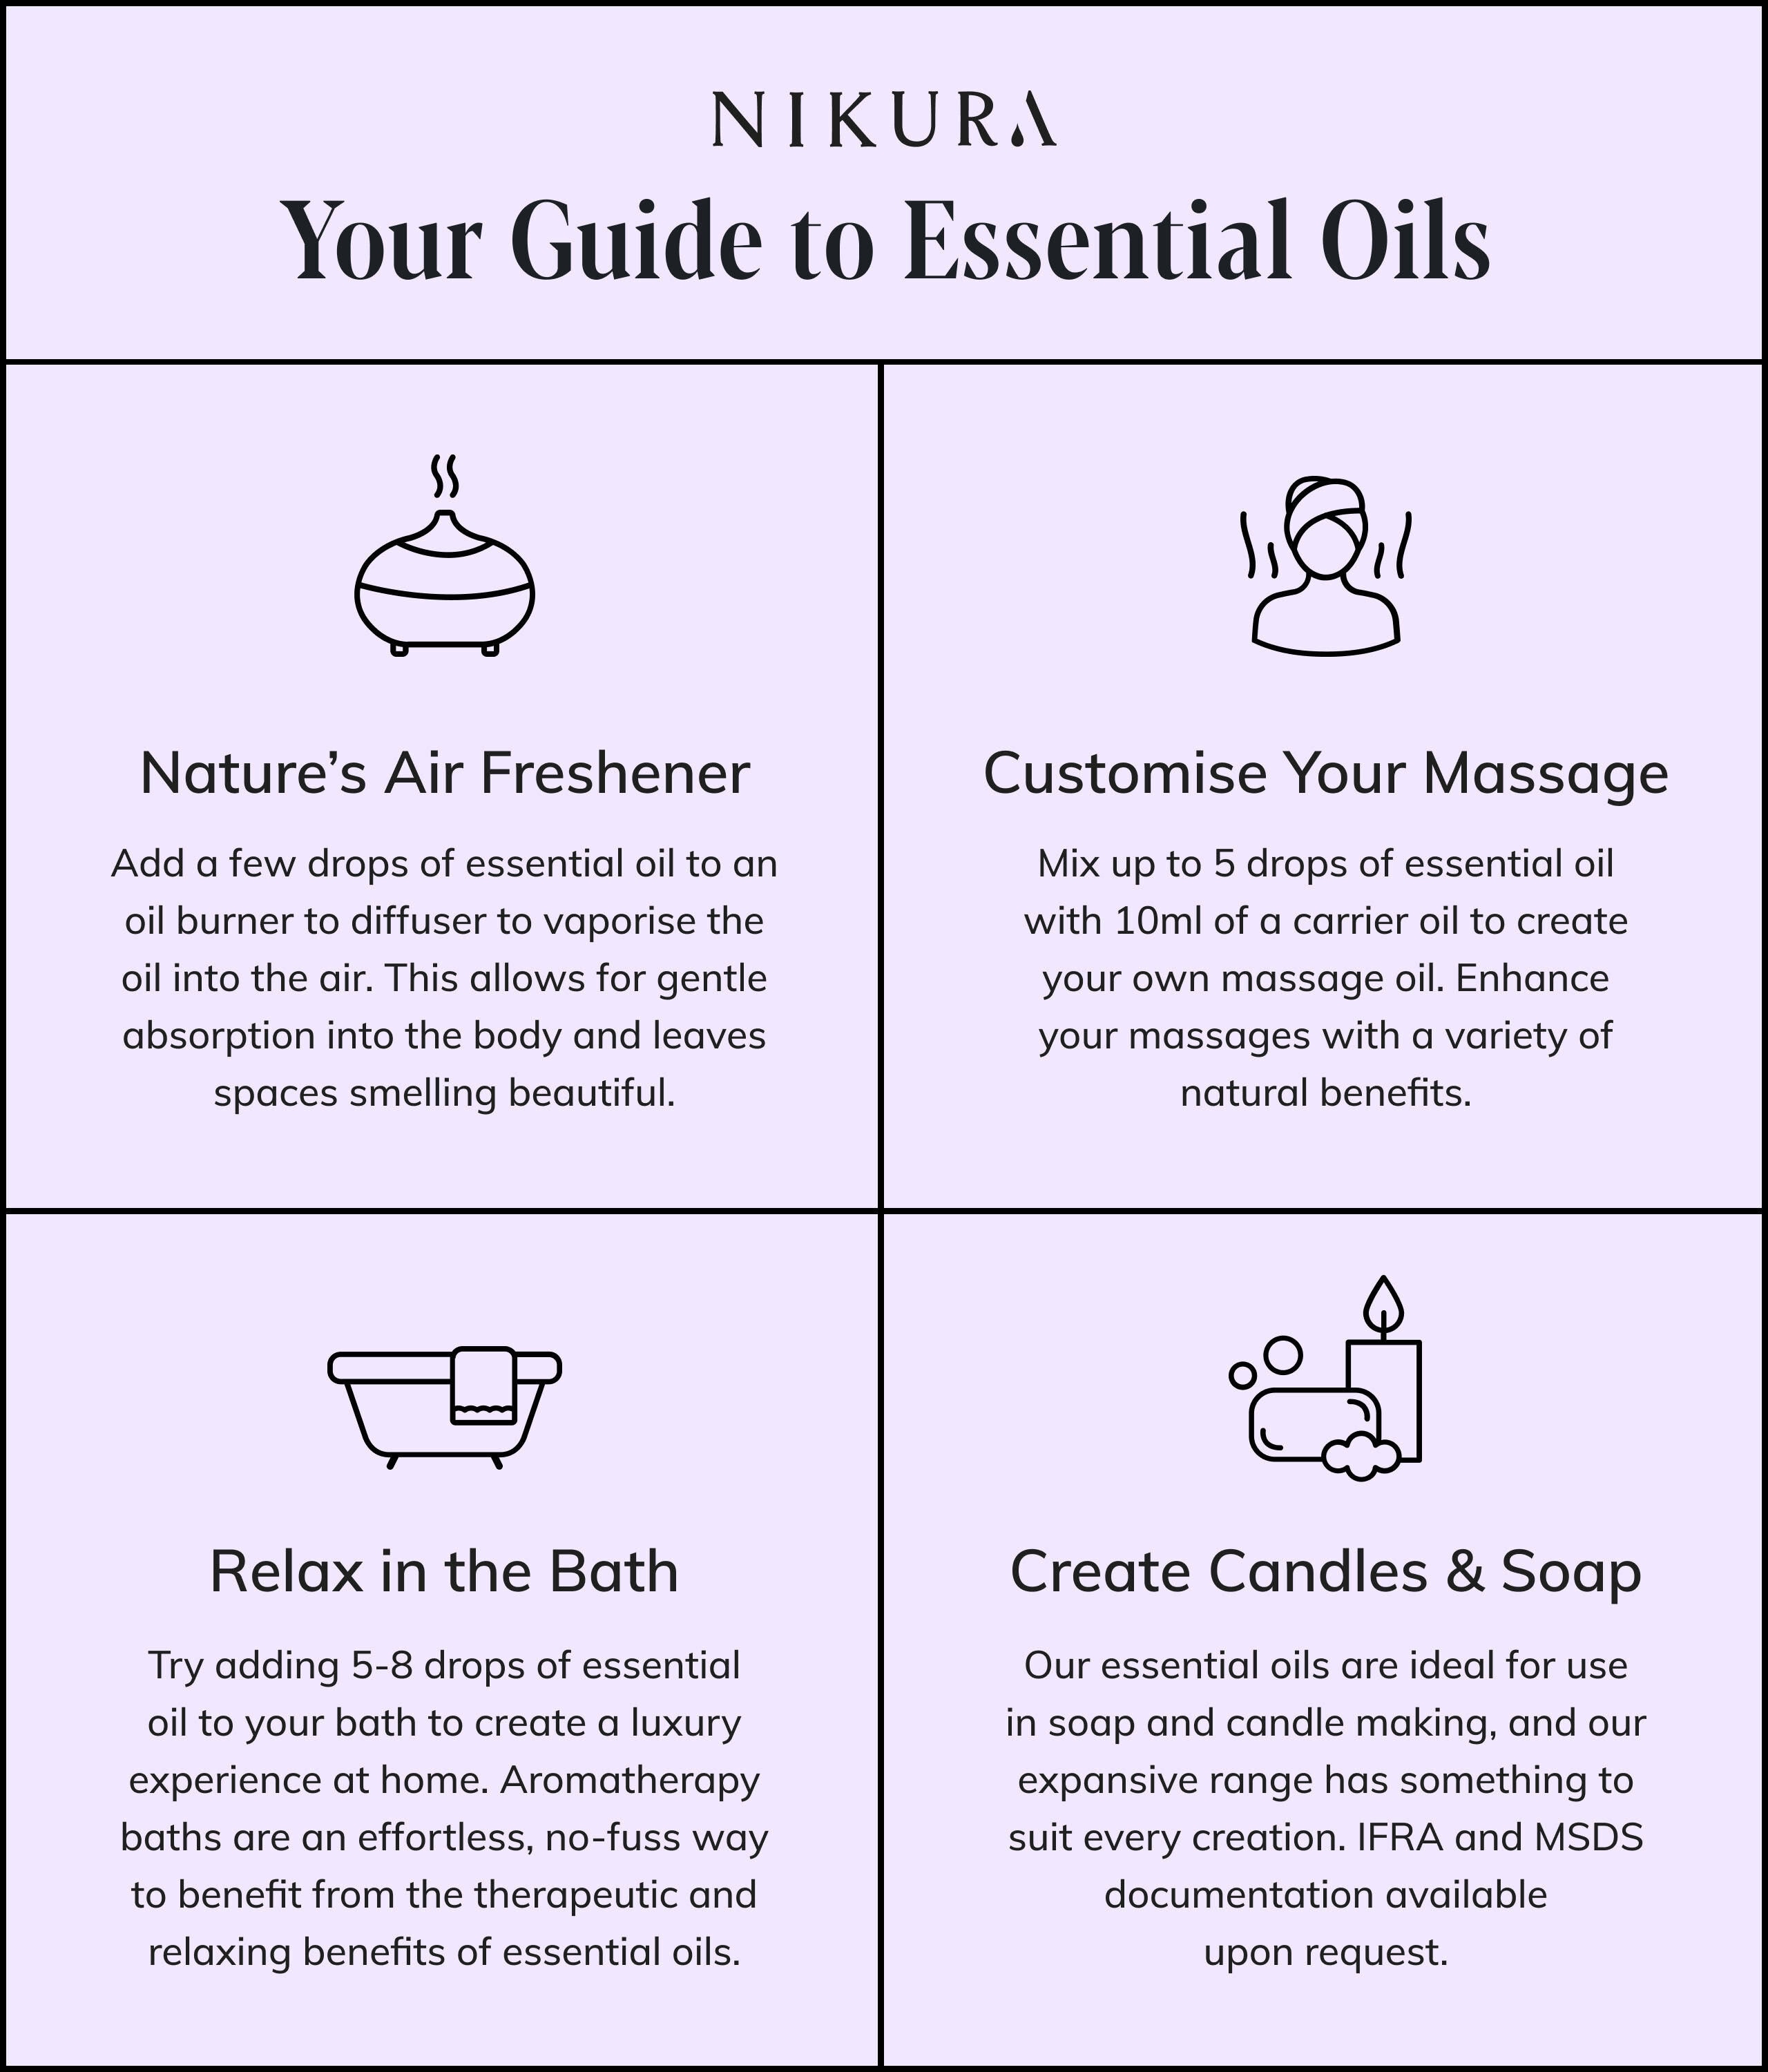 How Do You Mix Essential Oils with Carrier Oils: A Guide